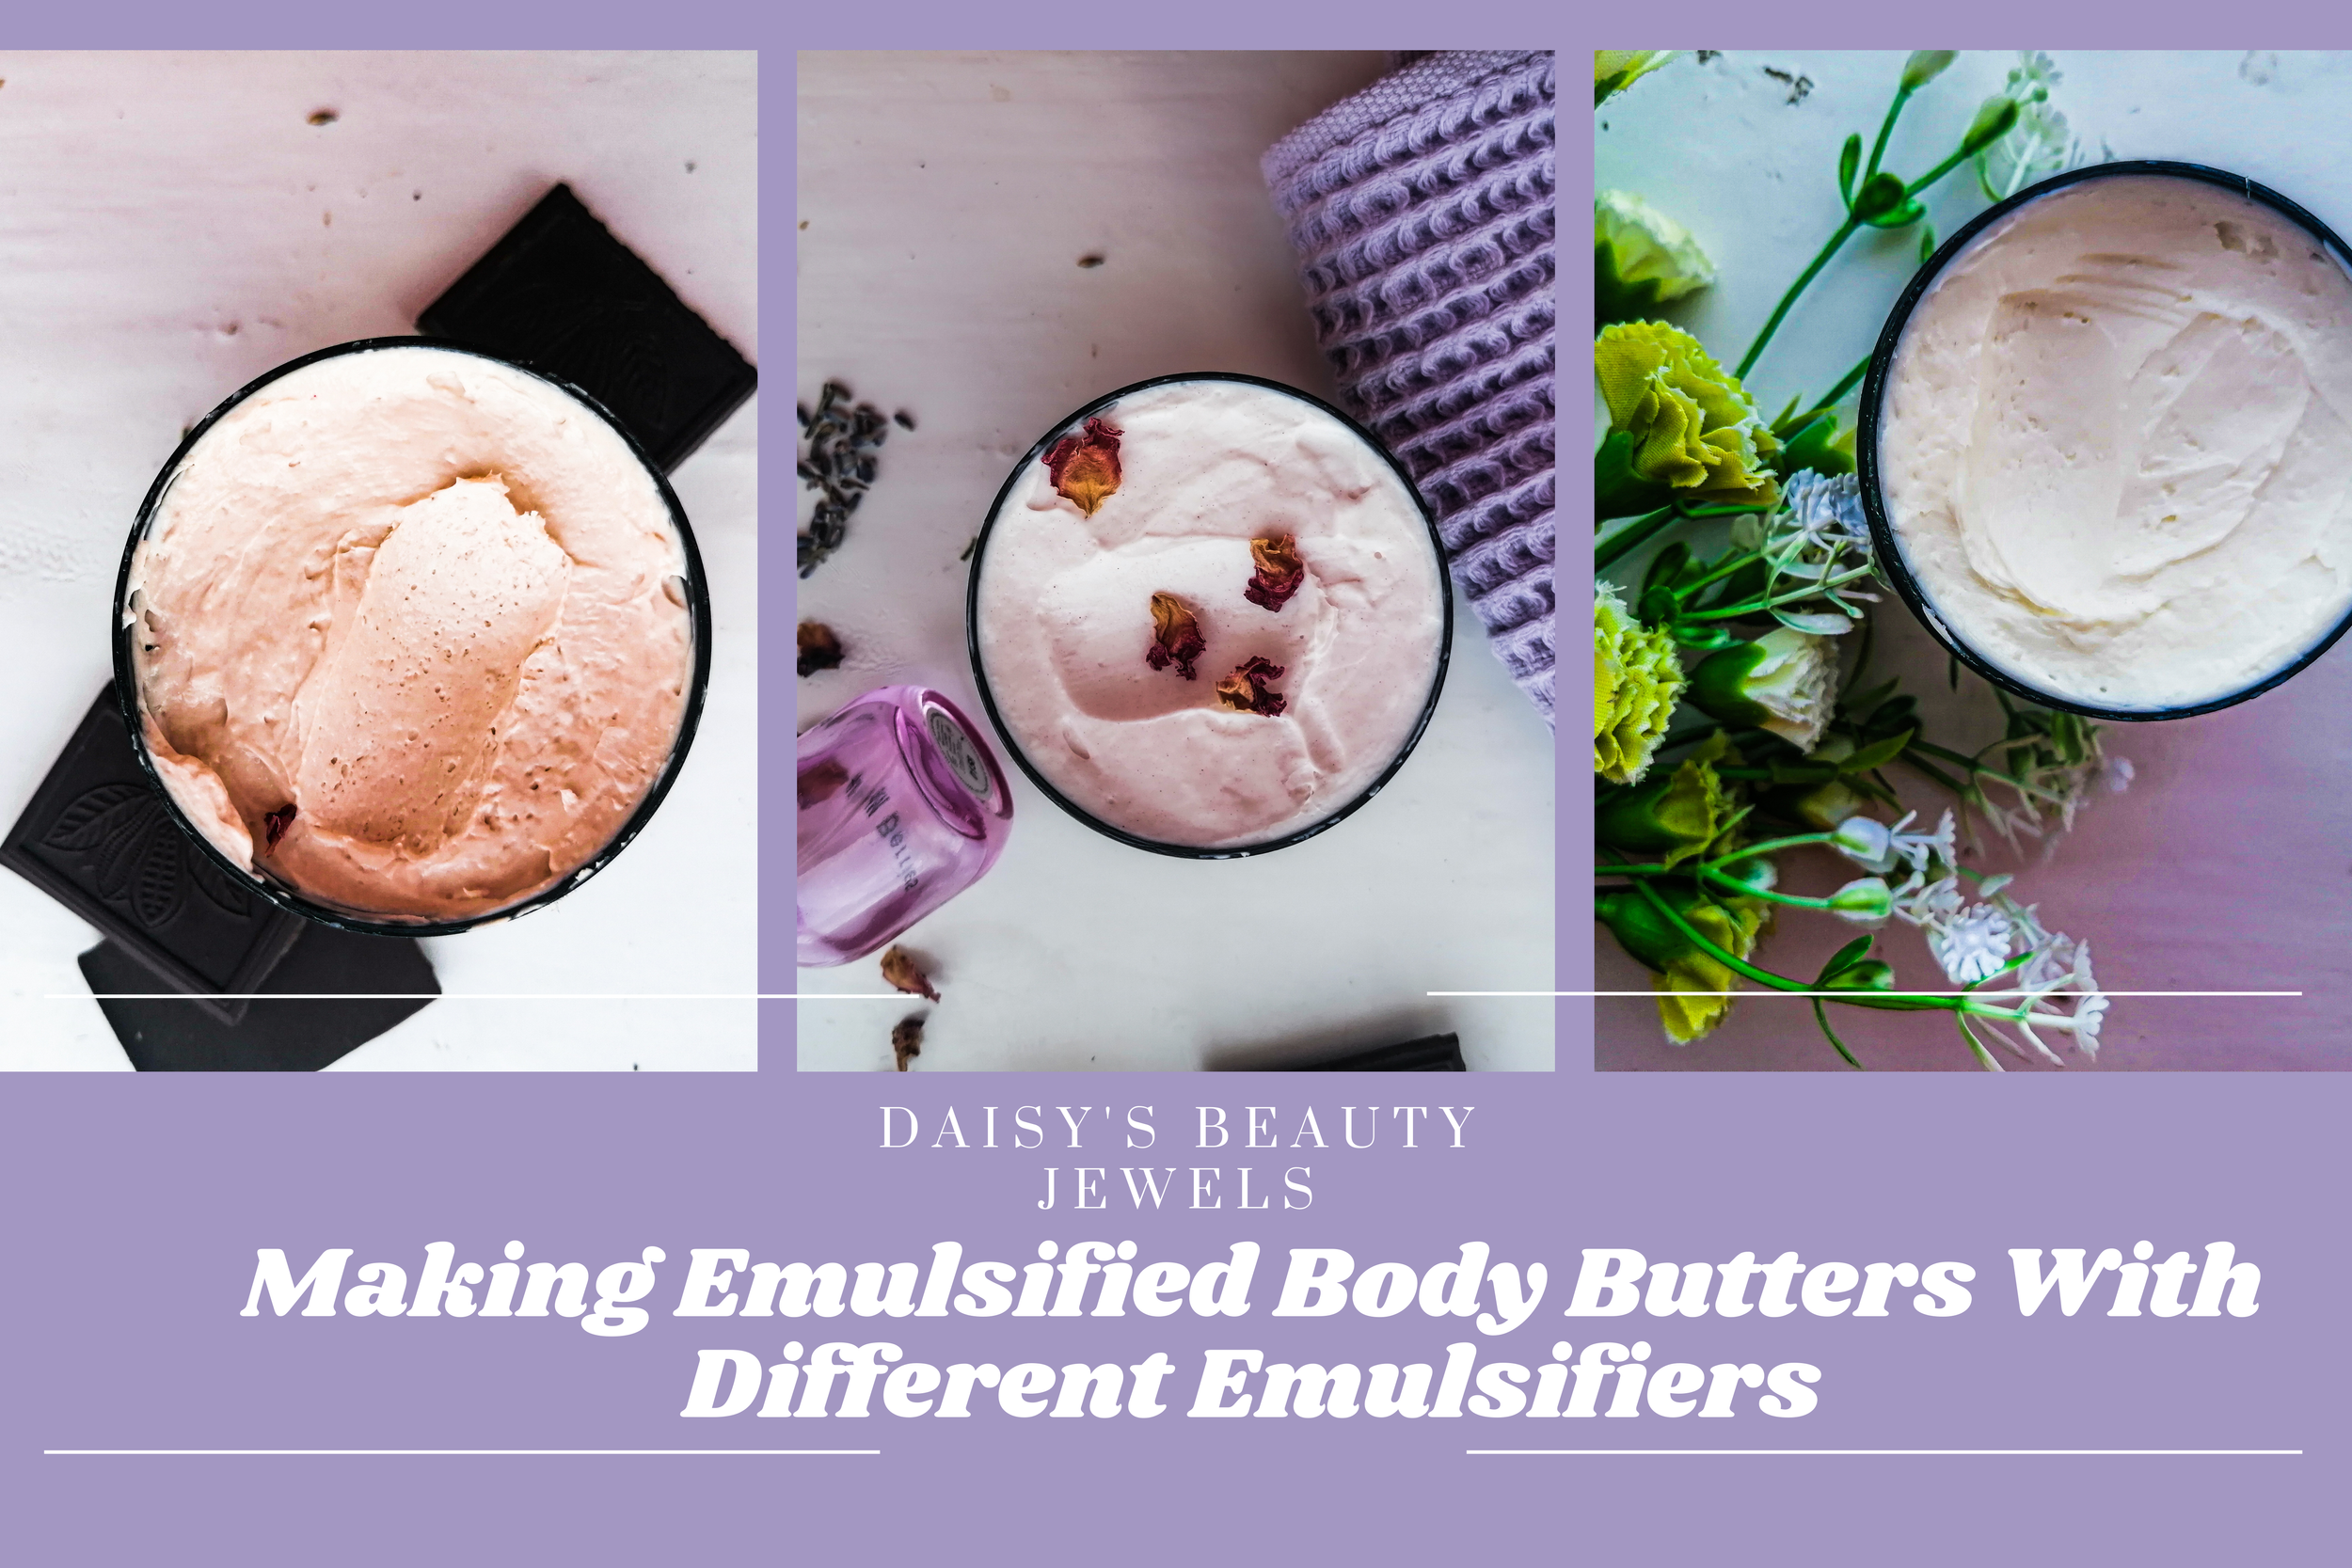 Emulsifying wax; what is it and why I don't recommend using it